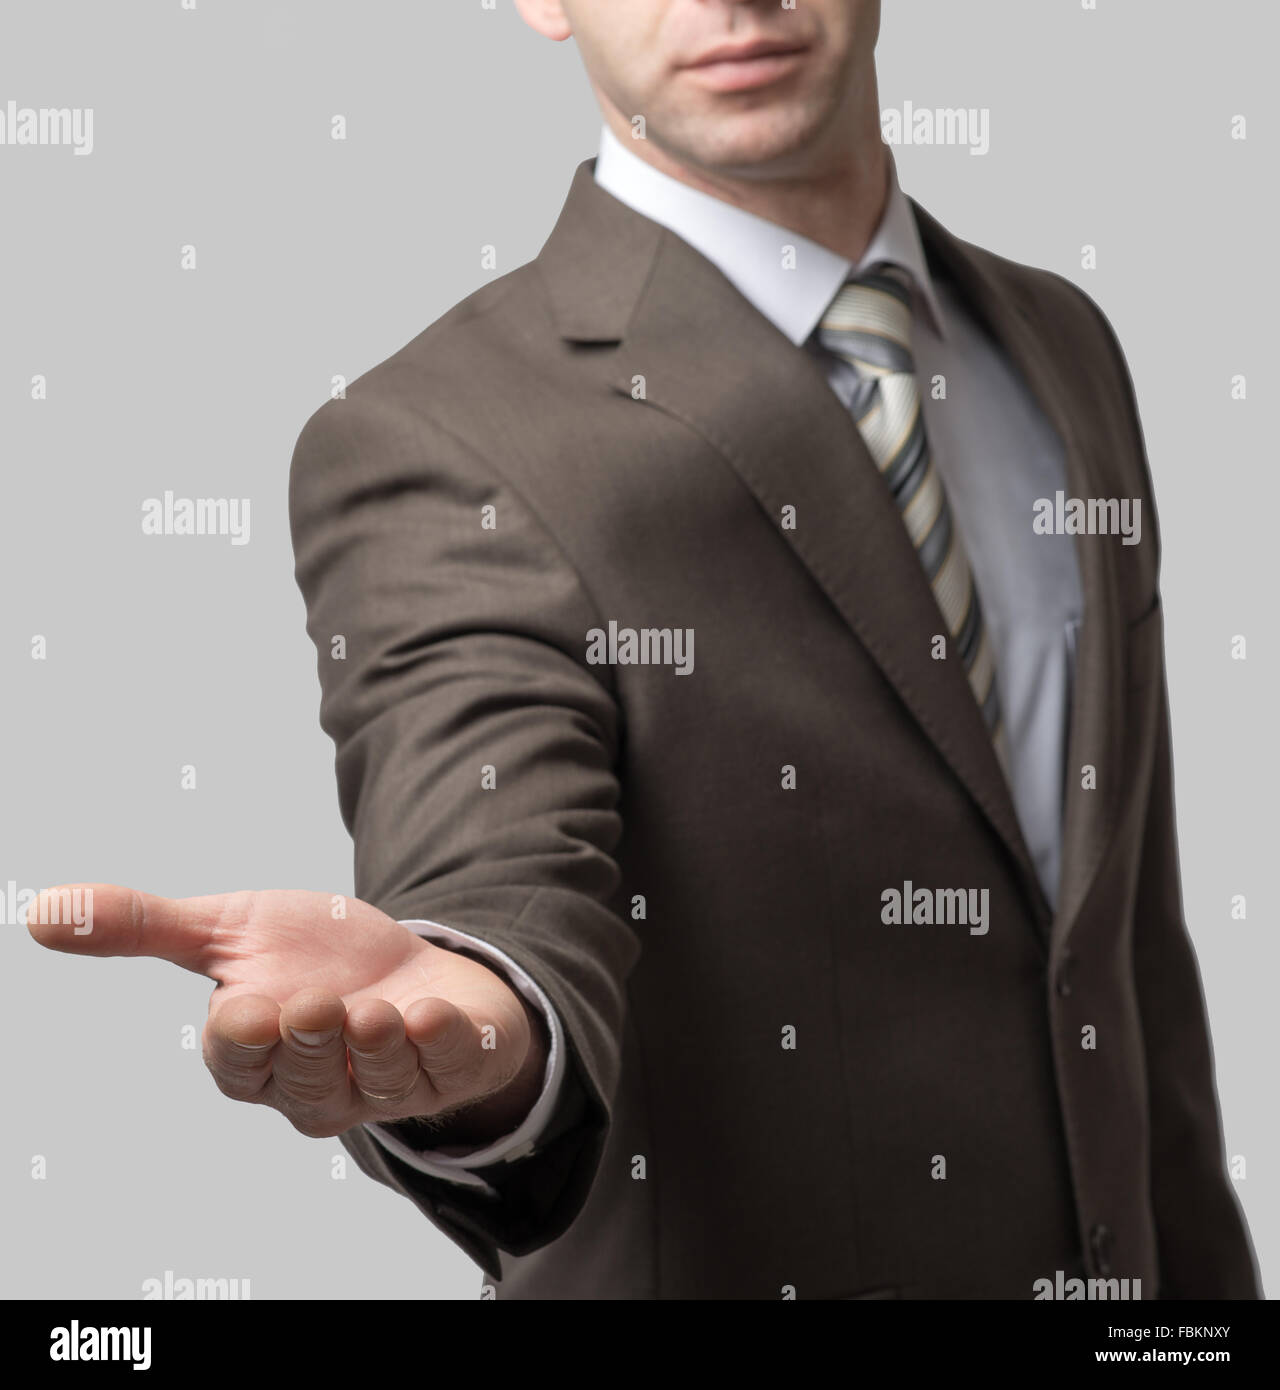 Businessman with outstretched hand Stock Photo